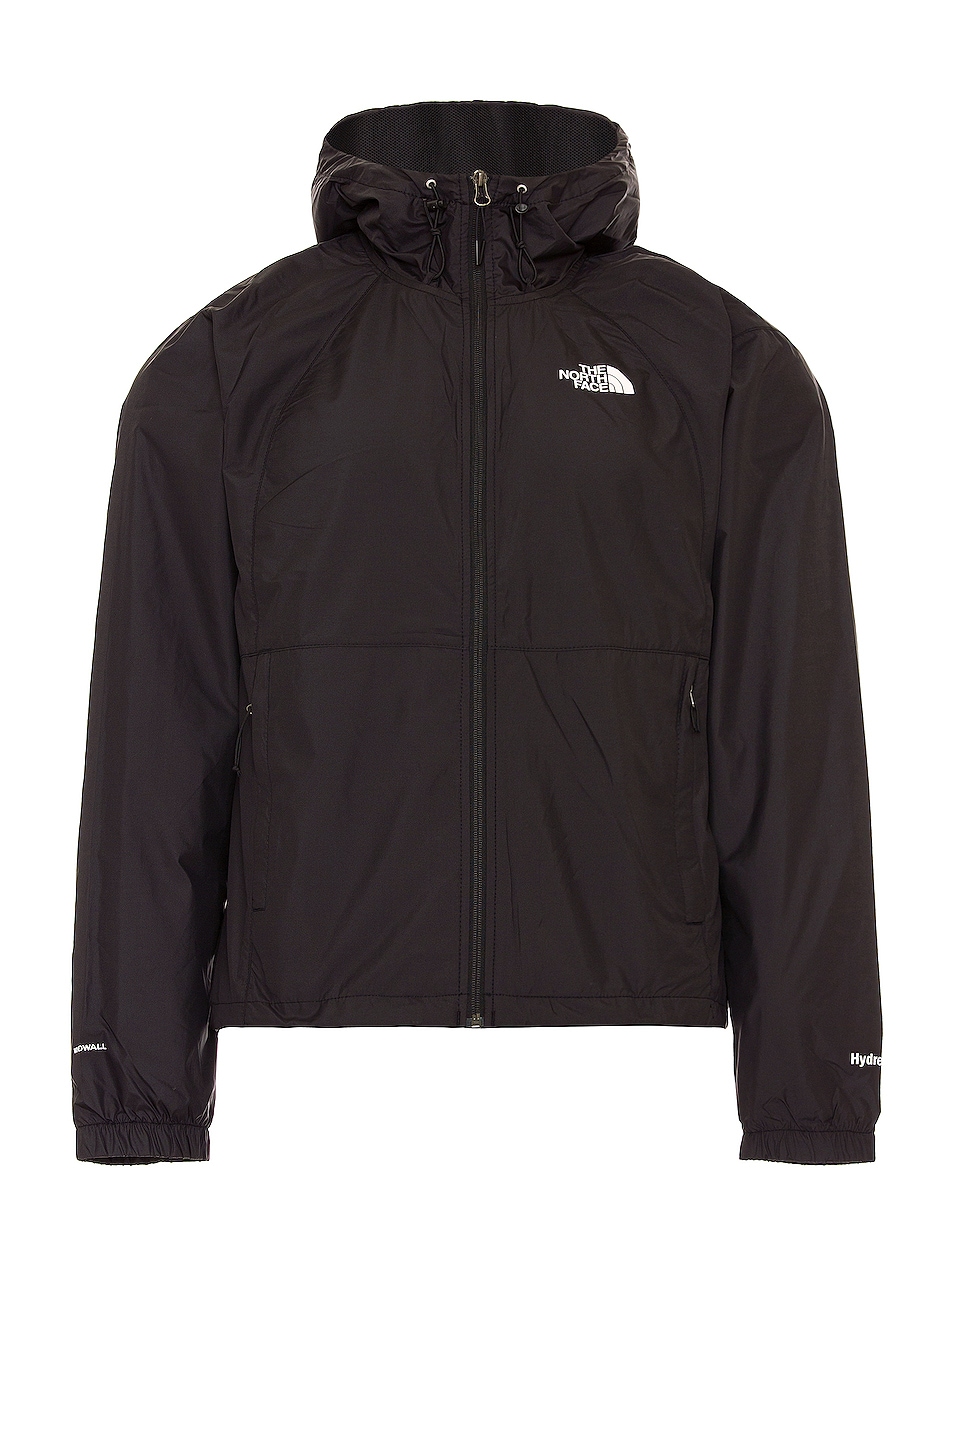 Image 1 of The North Face Hydrenaline Jacket 2000 in Black